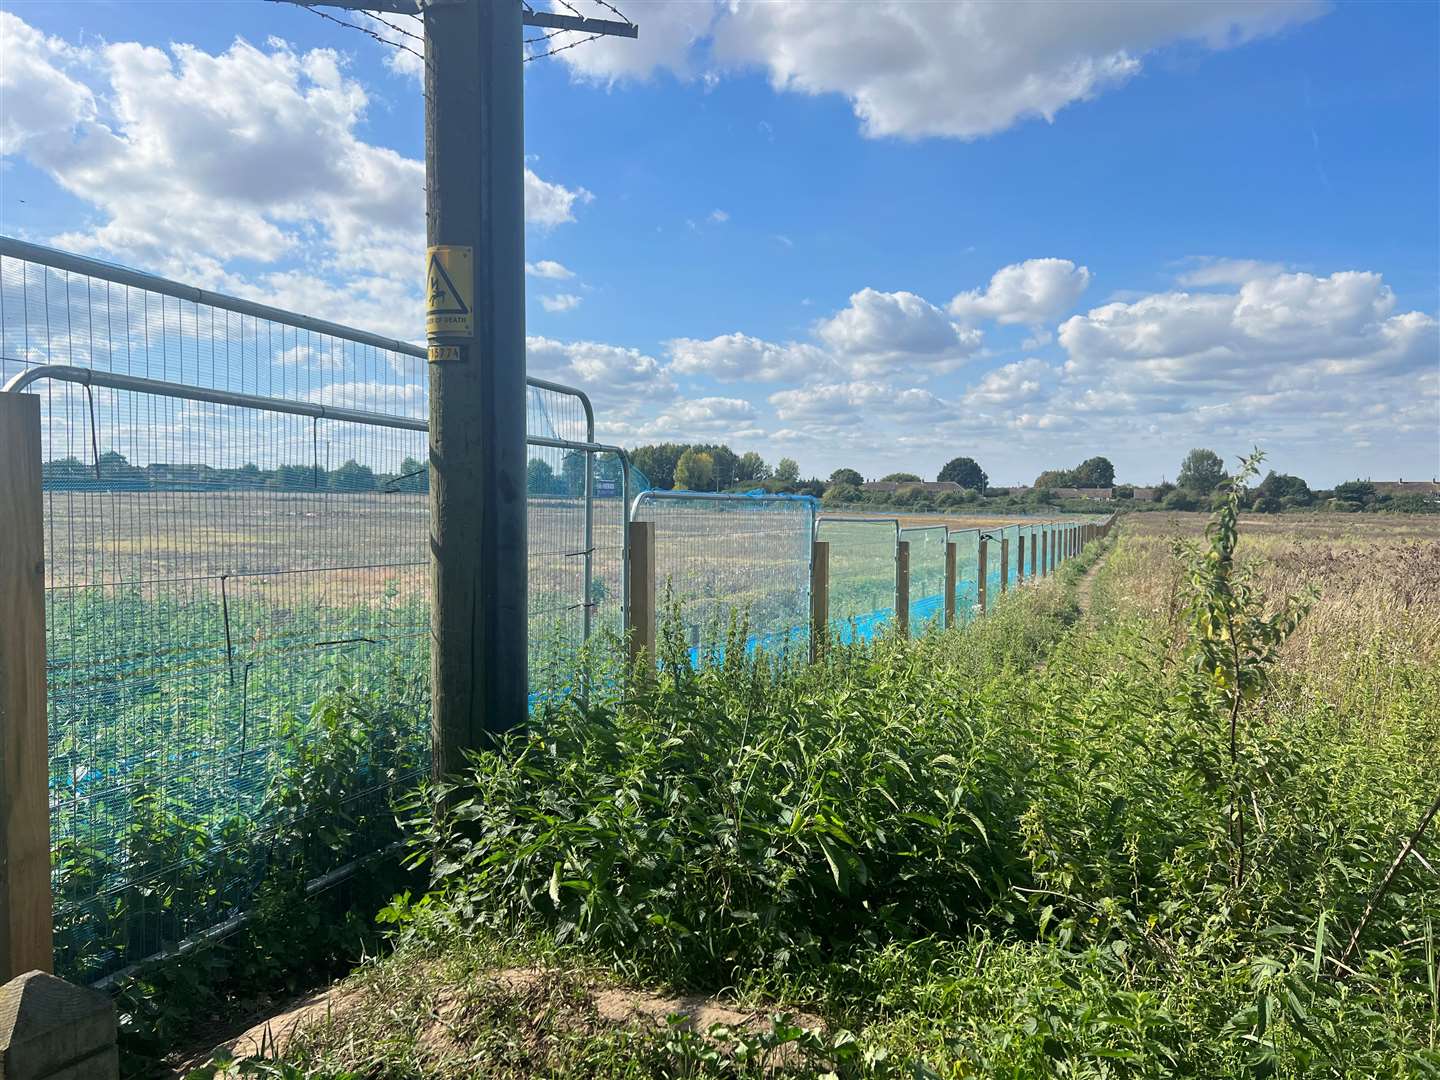 Where new houses are planned to be built in Teynham. Picture: Megan Carr